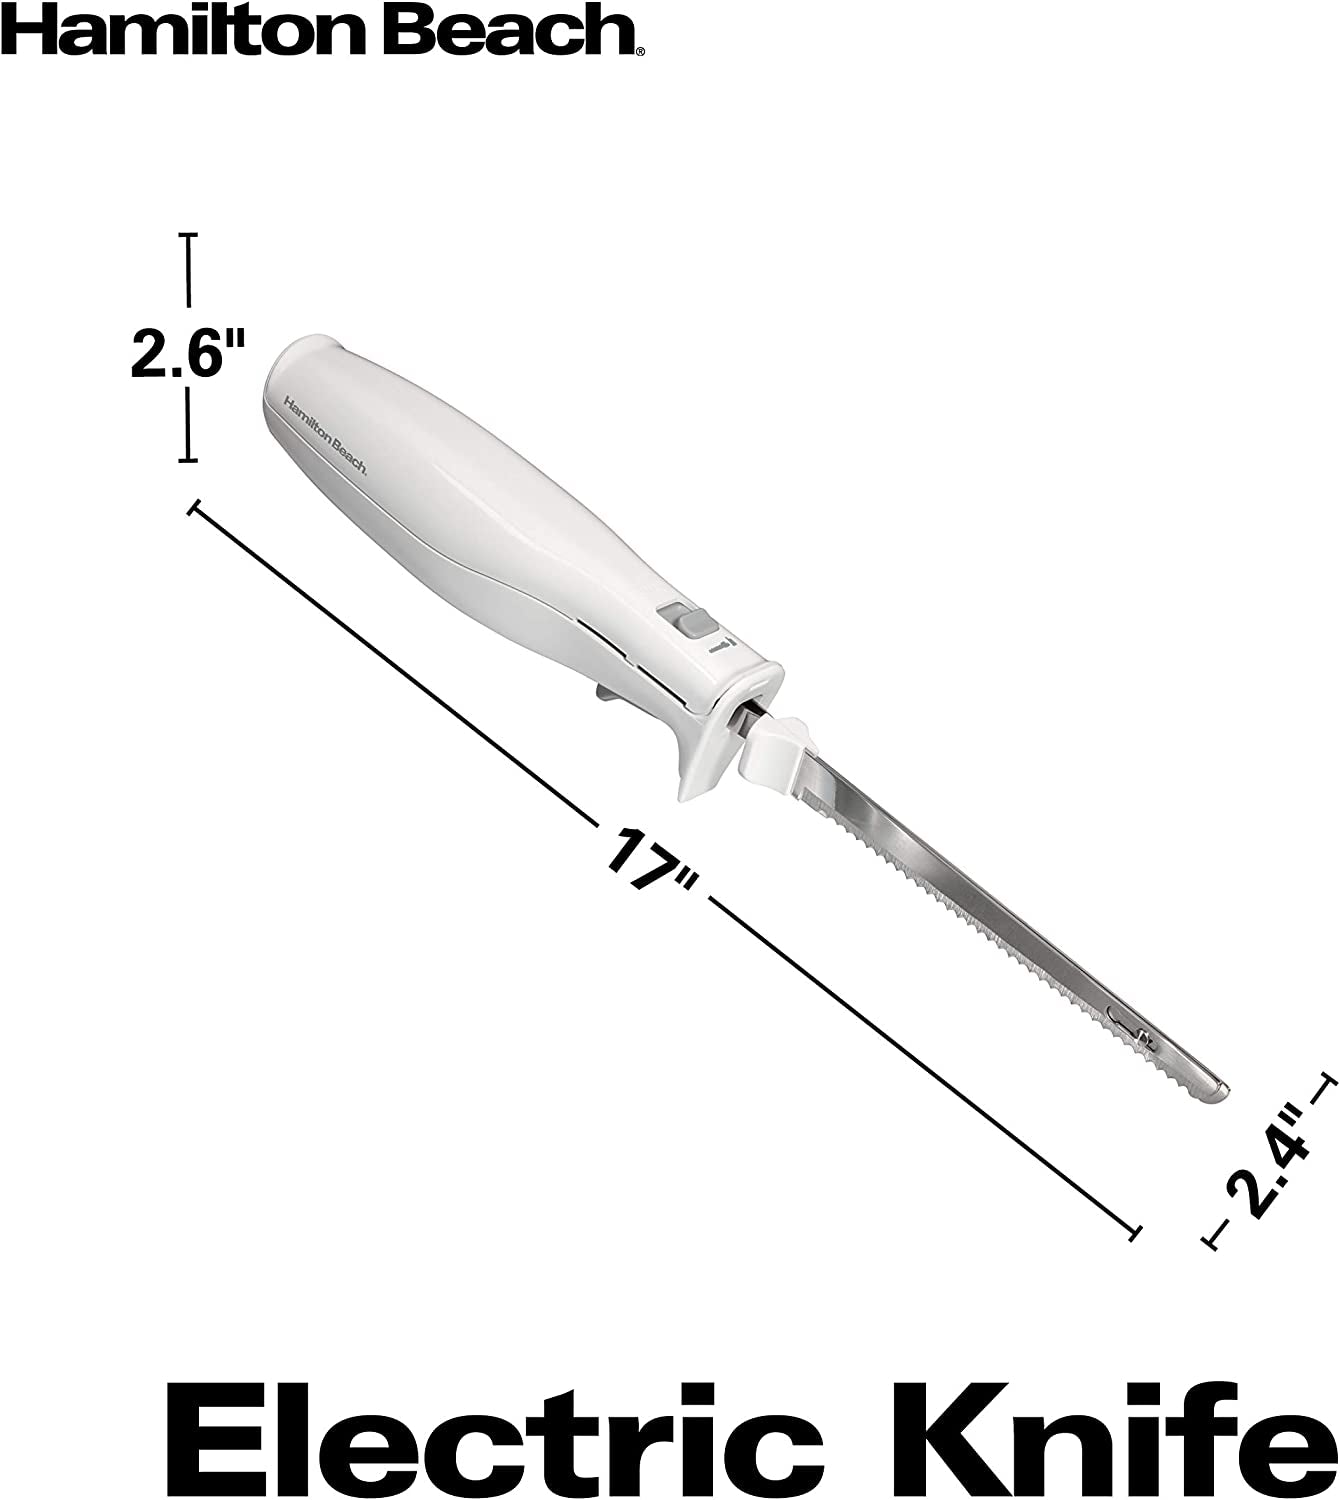 Hamilton Beach Electric Knife for Carving Meats, Poultry, Bread, Crafting Foam & More, Storage Case & Serving Fork Included, White